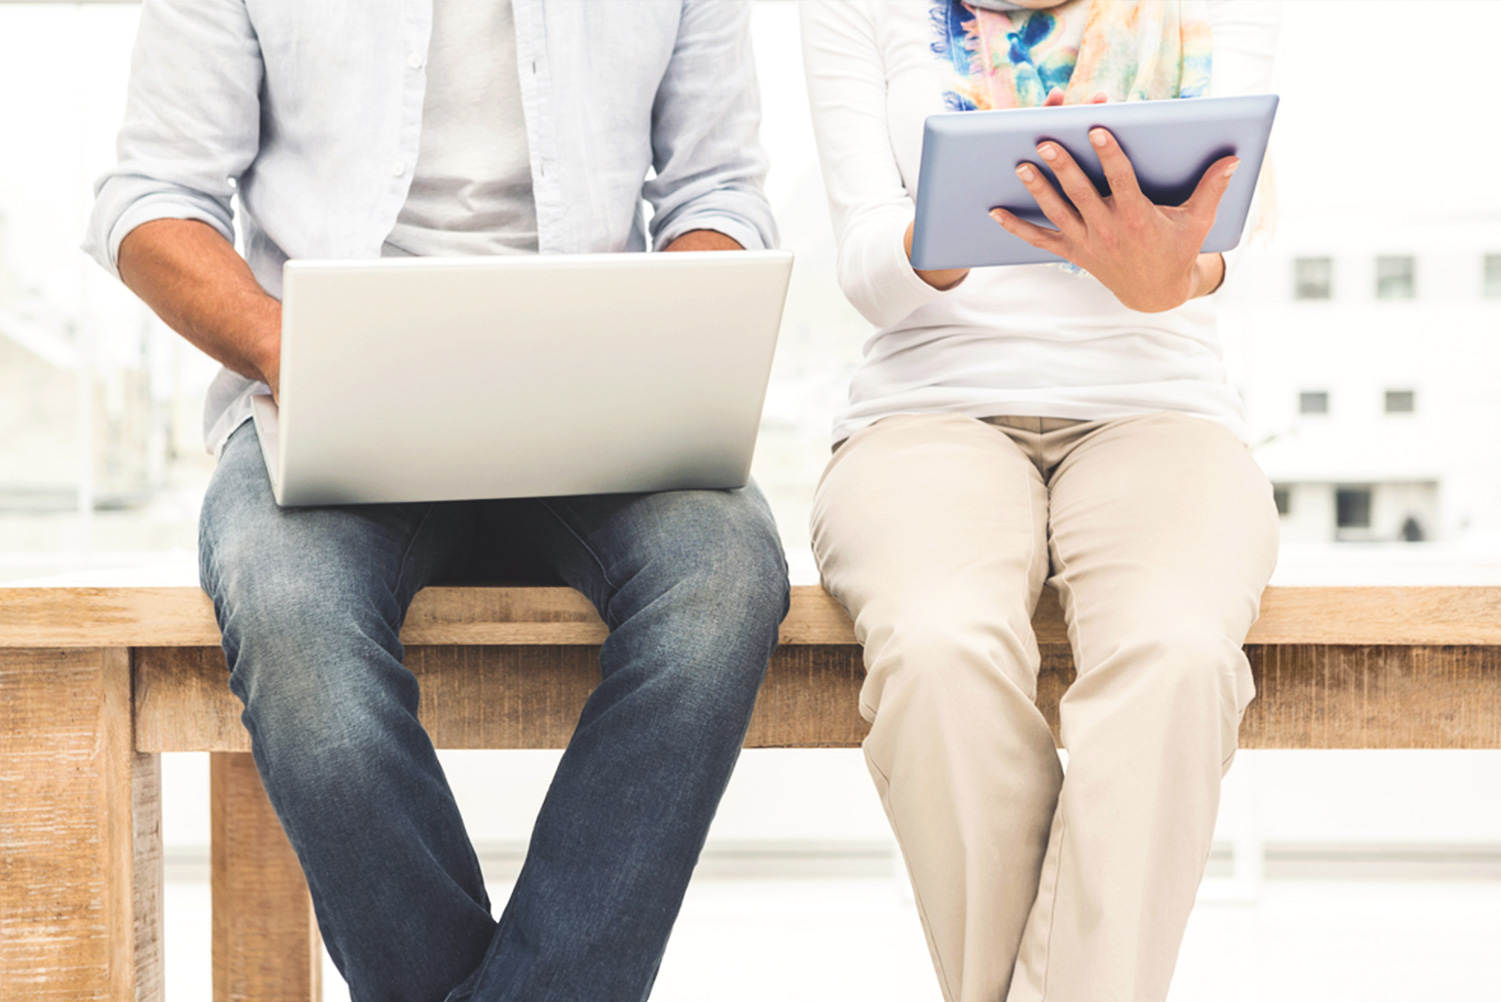 A man and woman sitting on a bench together using a laptop and tablet